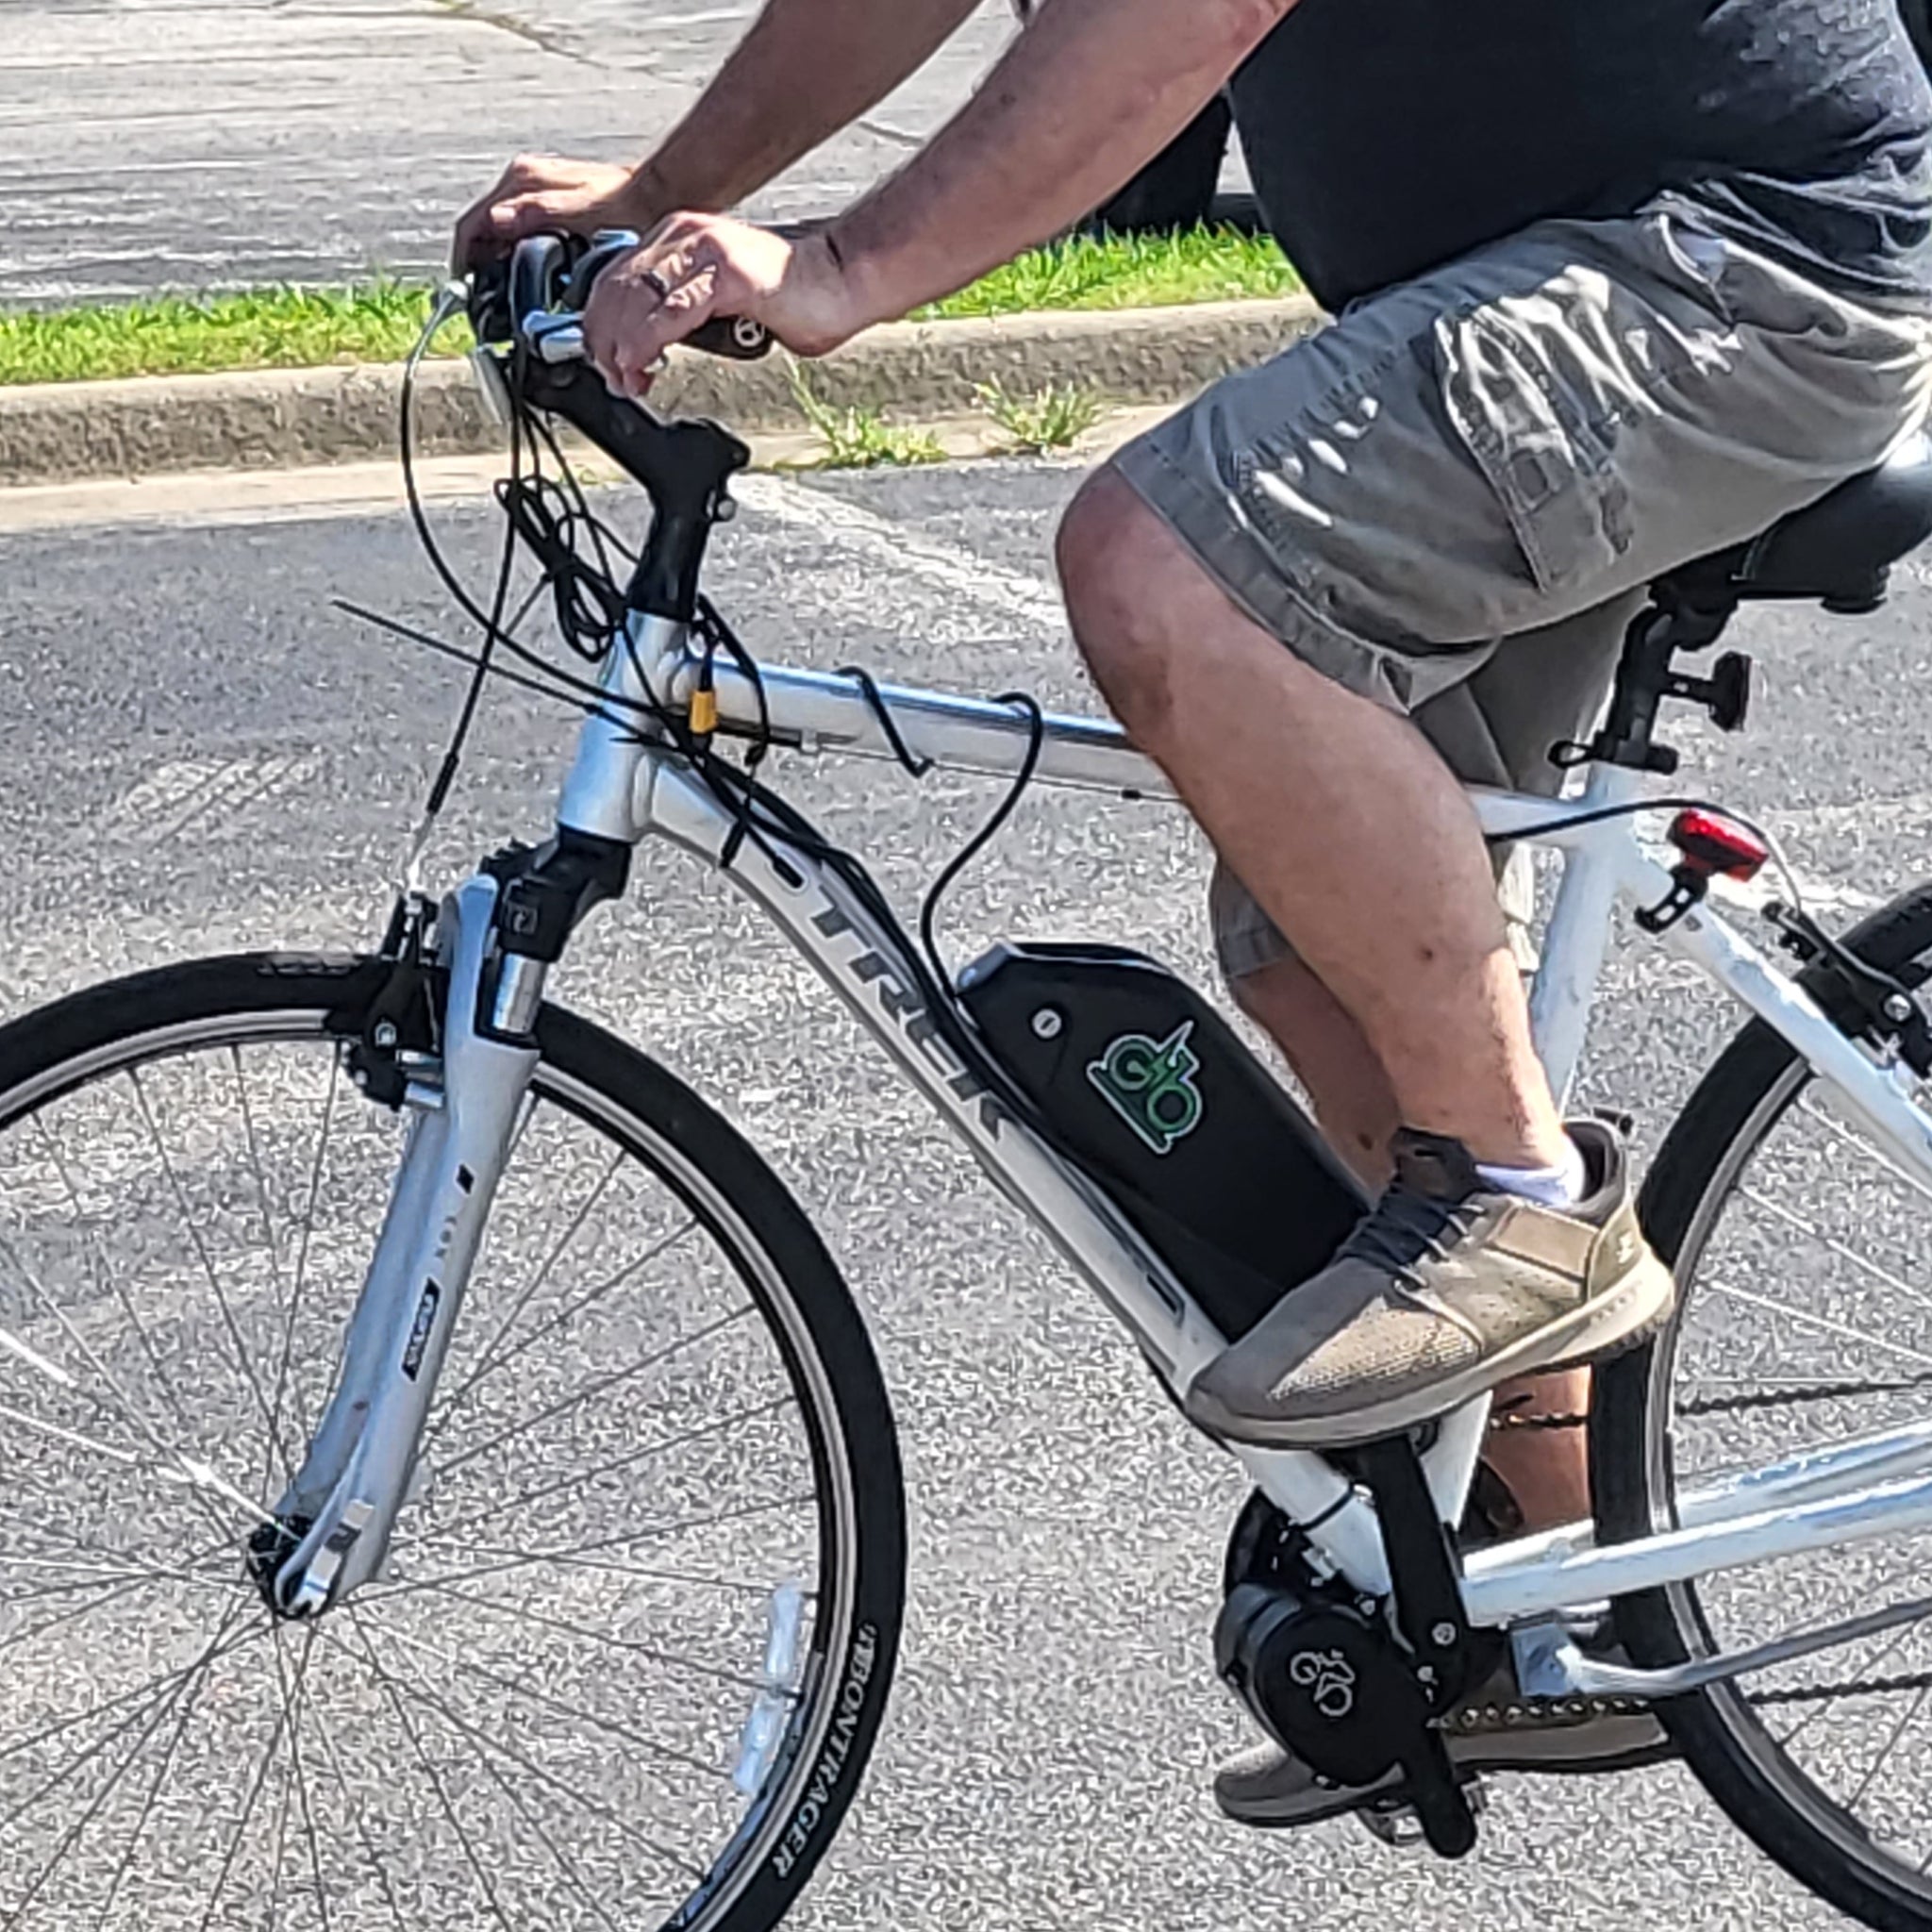 eBike Riding 101 - 6 Tips for Safe Riding